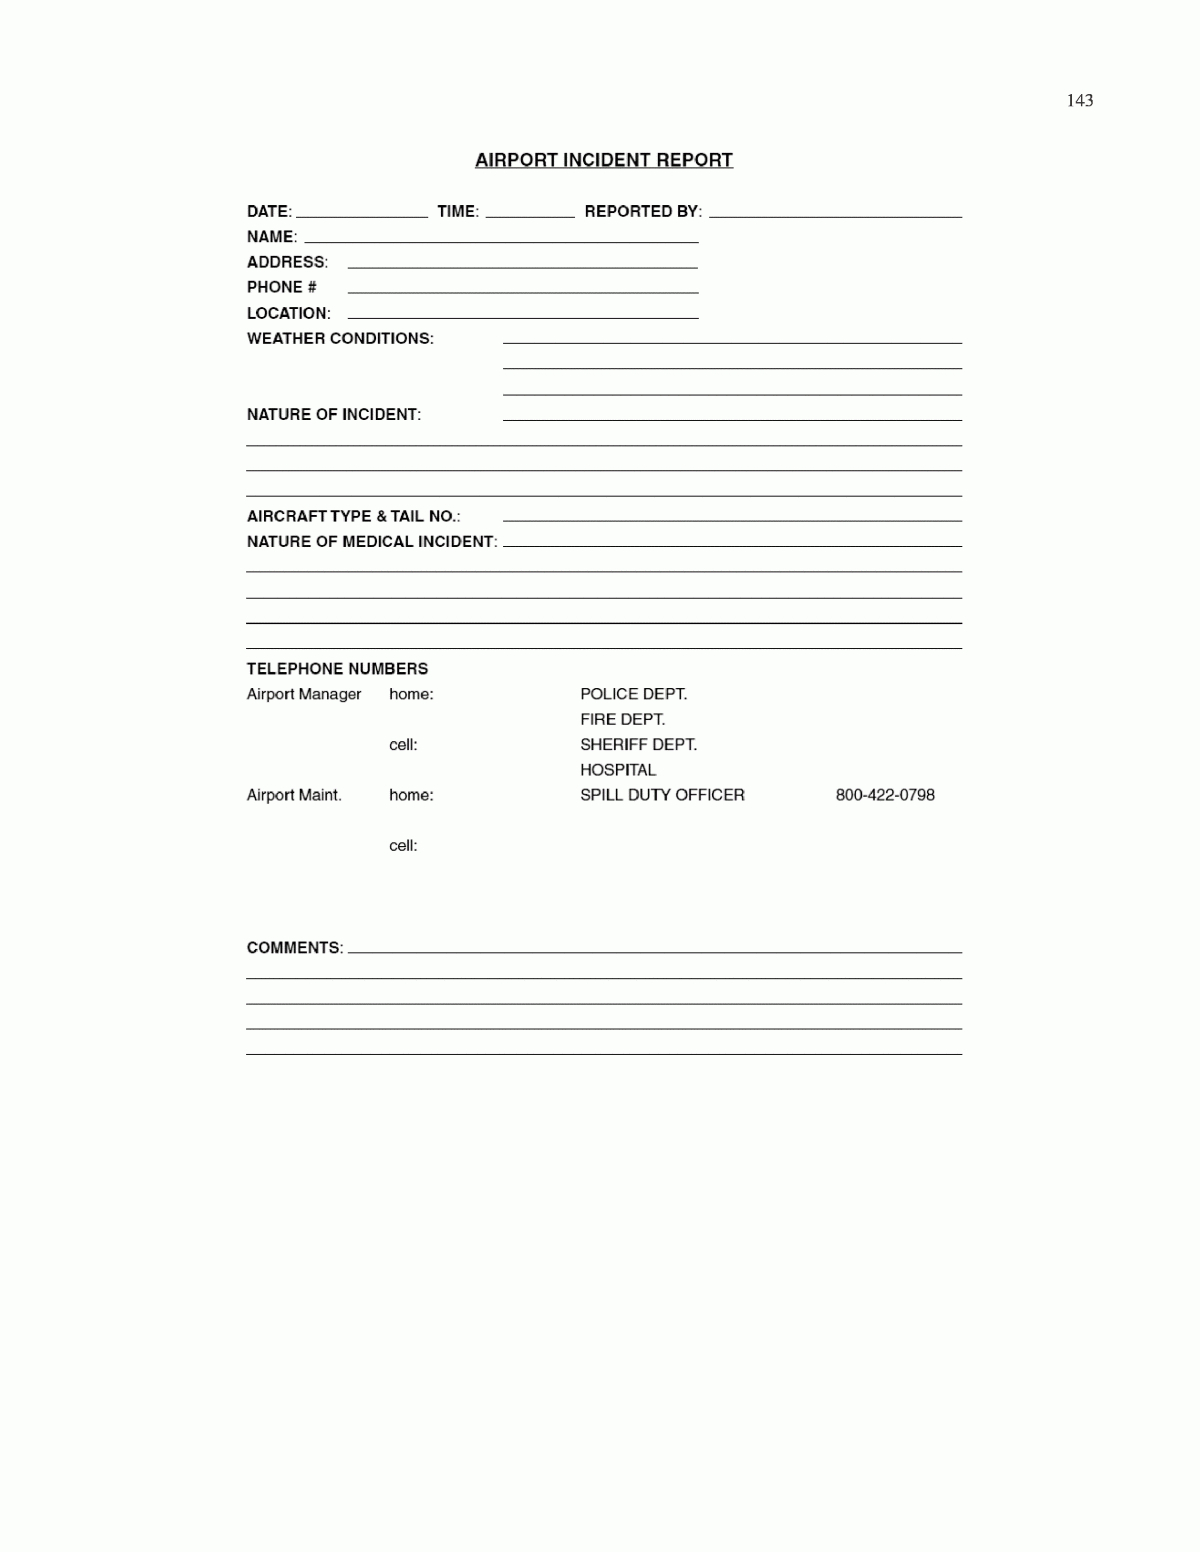 Appendix M – Sample Airport Incident Report Form For Spill Throughout Customer Incident Report Form Template